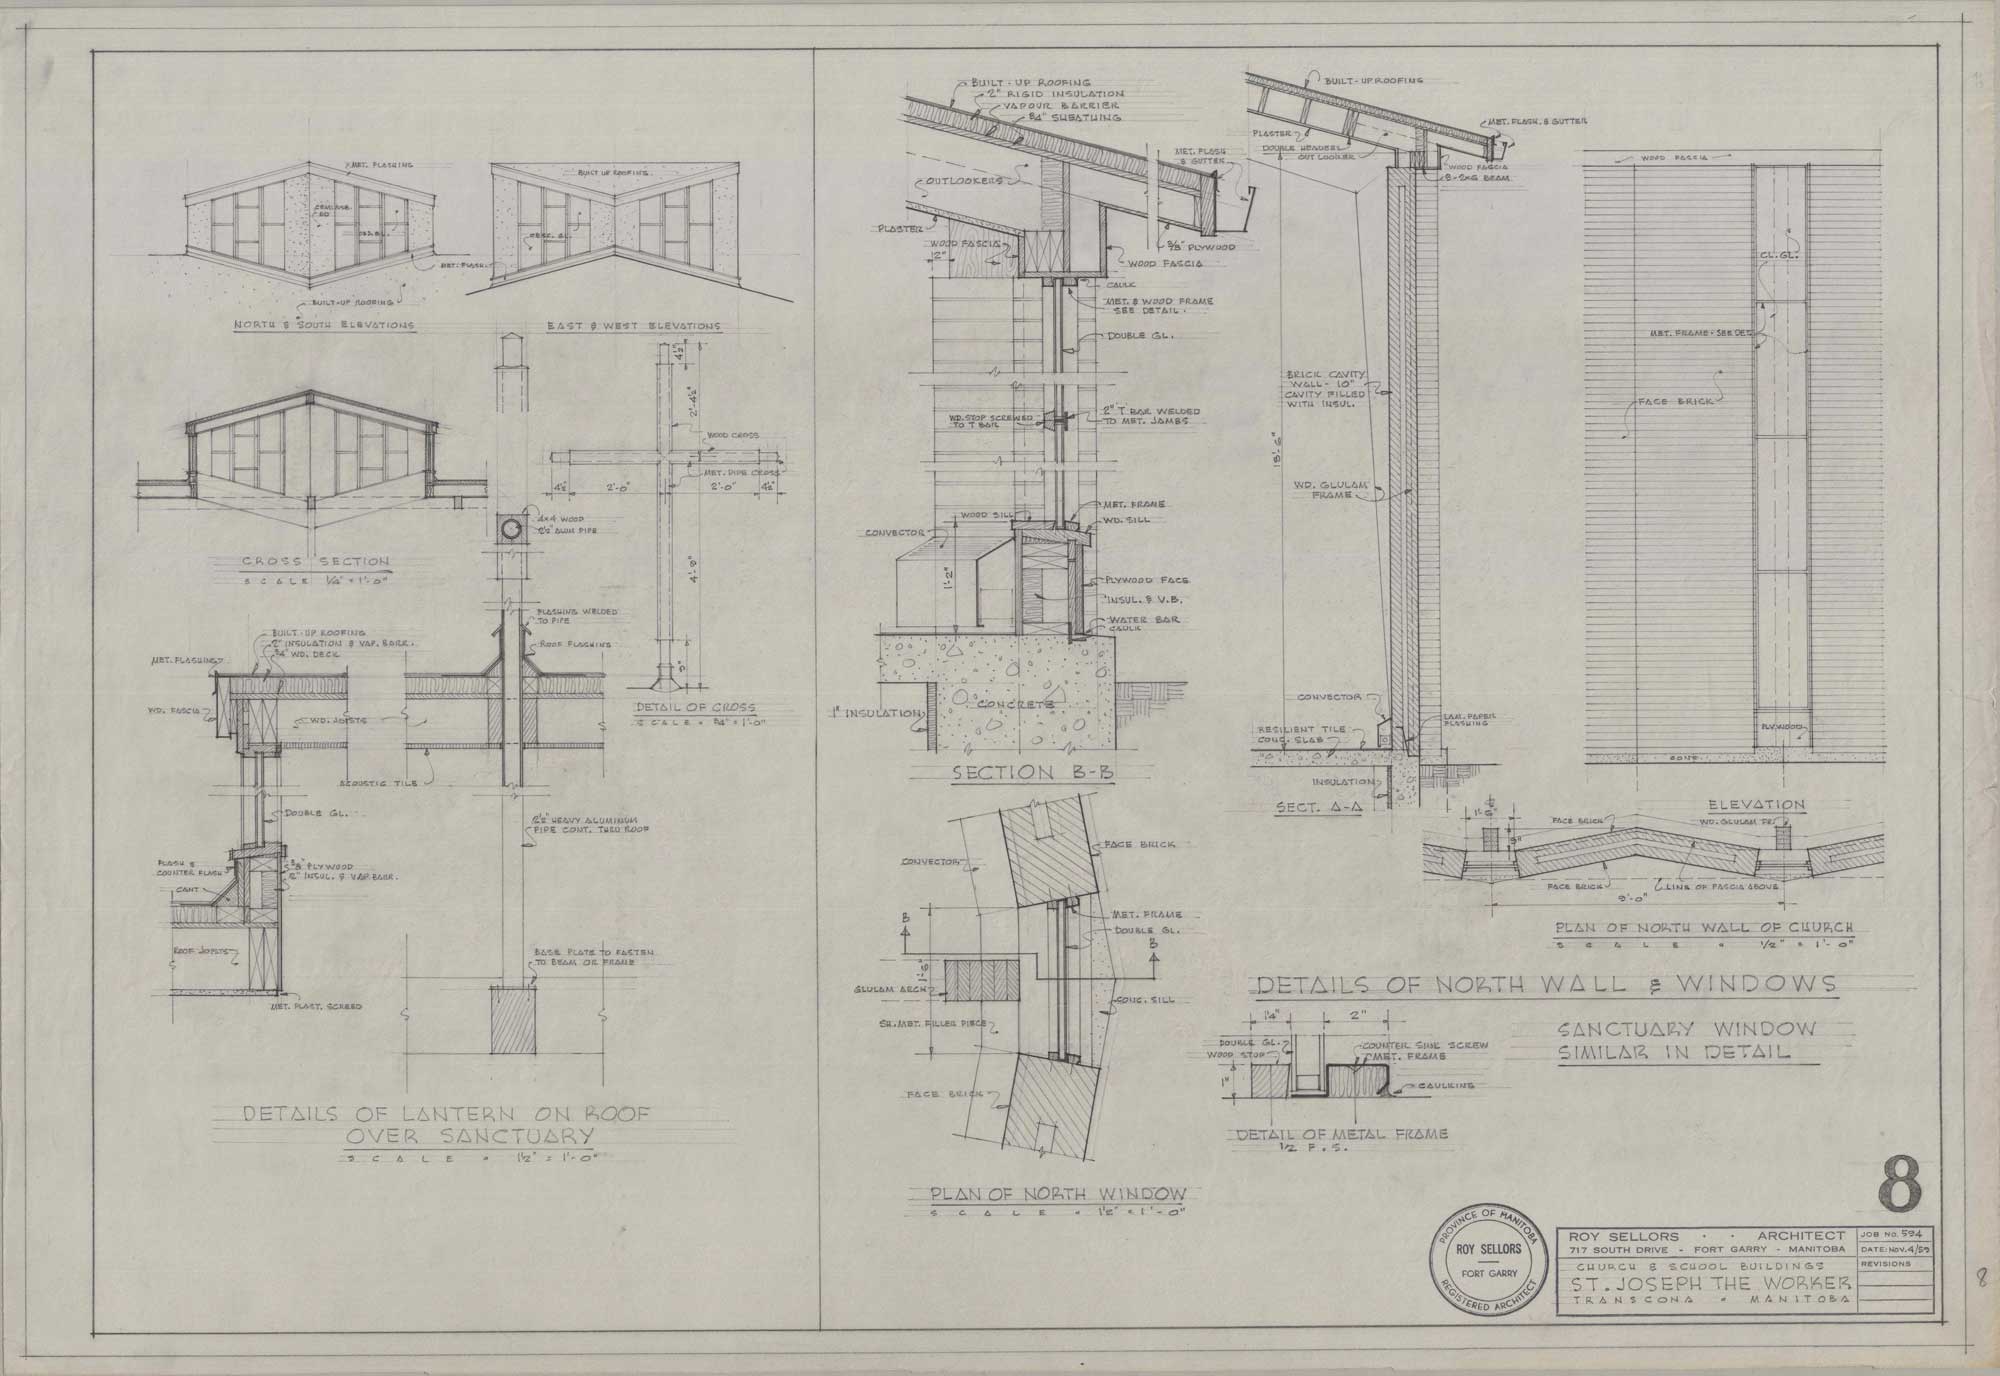 Image shows drawings of details of the lantern on the roof over the sanctuary, the plan of the north window, and the details of the north wall and windows for St. Joseph the Worker Church.